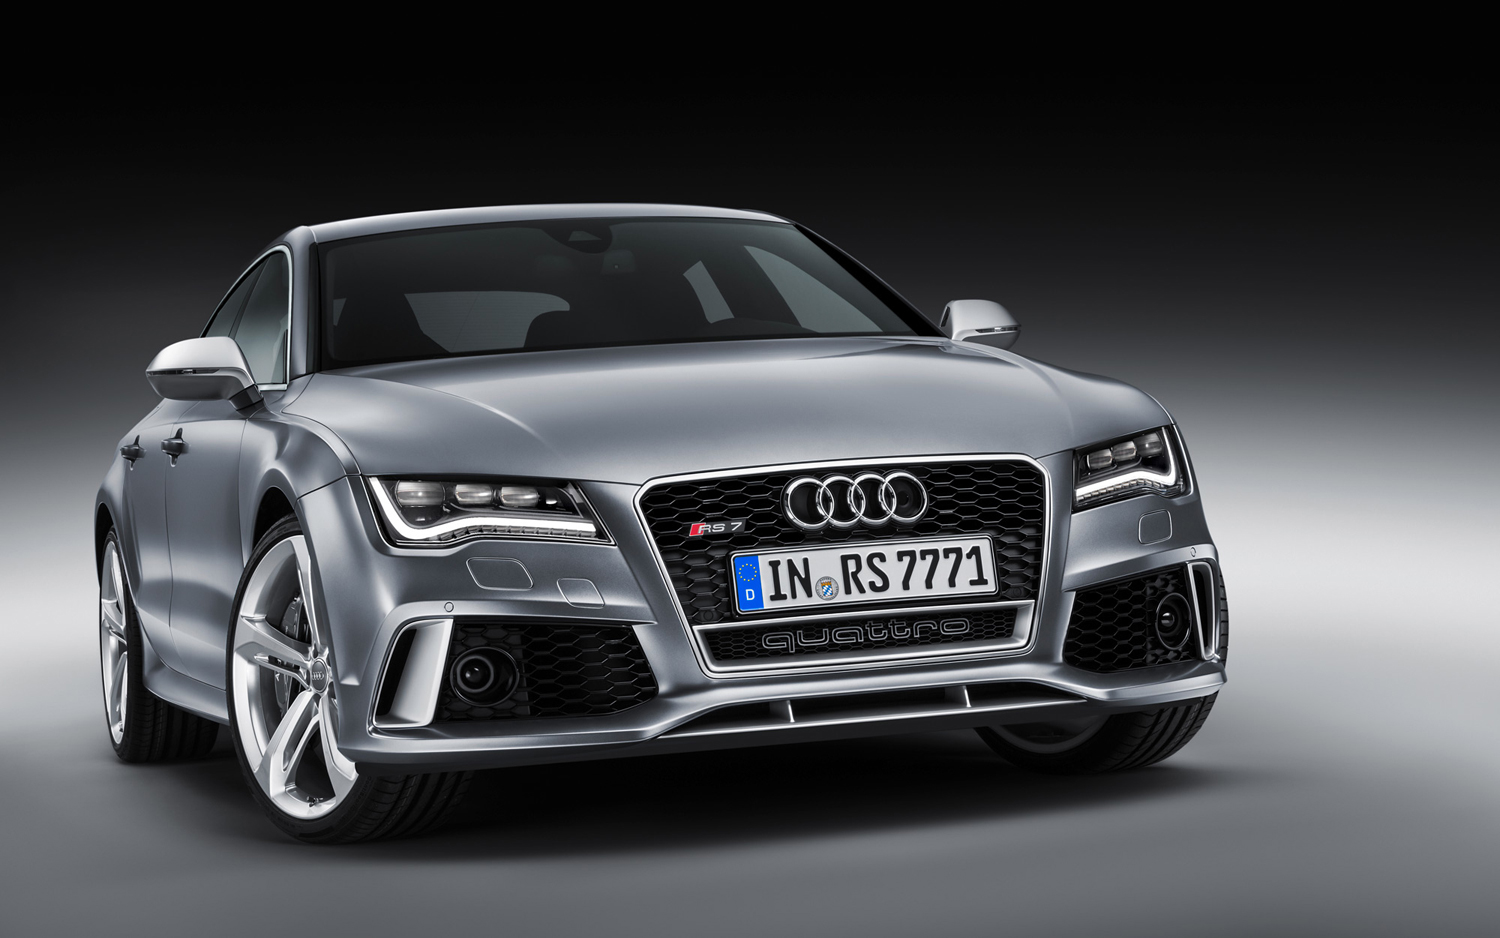 Audi RS 7 to launch in India on January 6